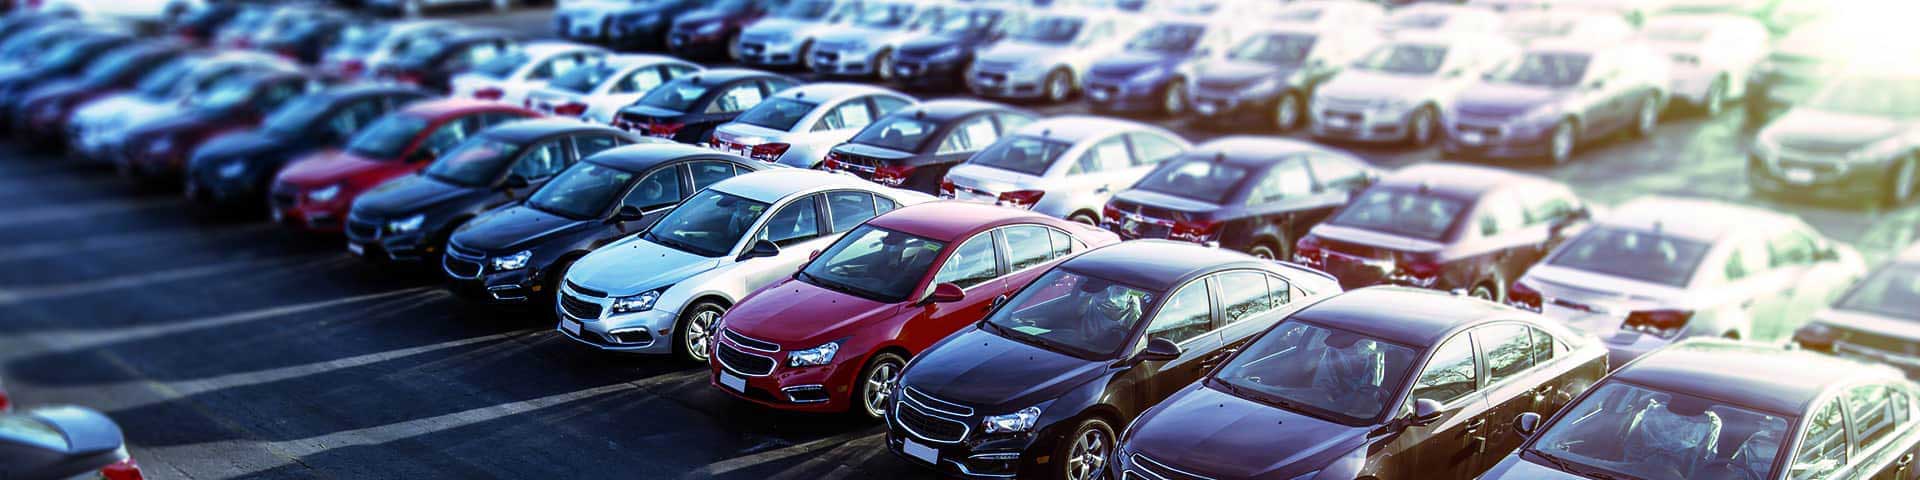 Used Cars for sale in Mounds View